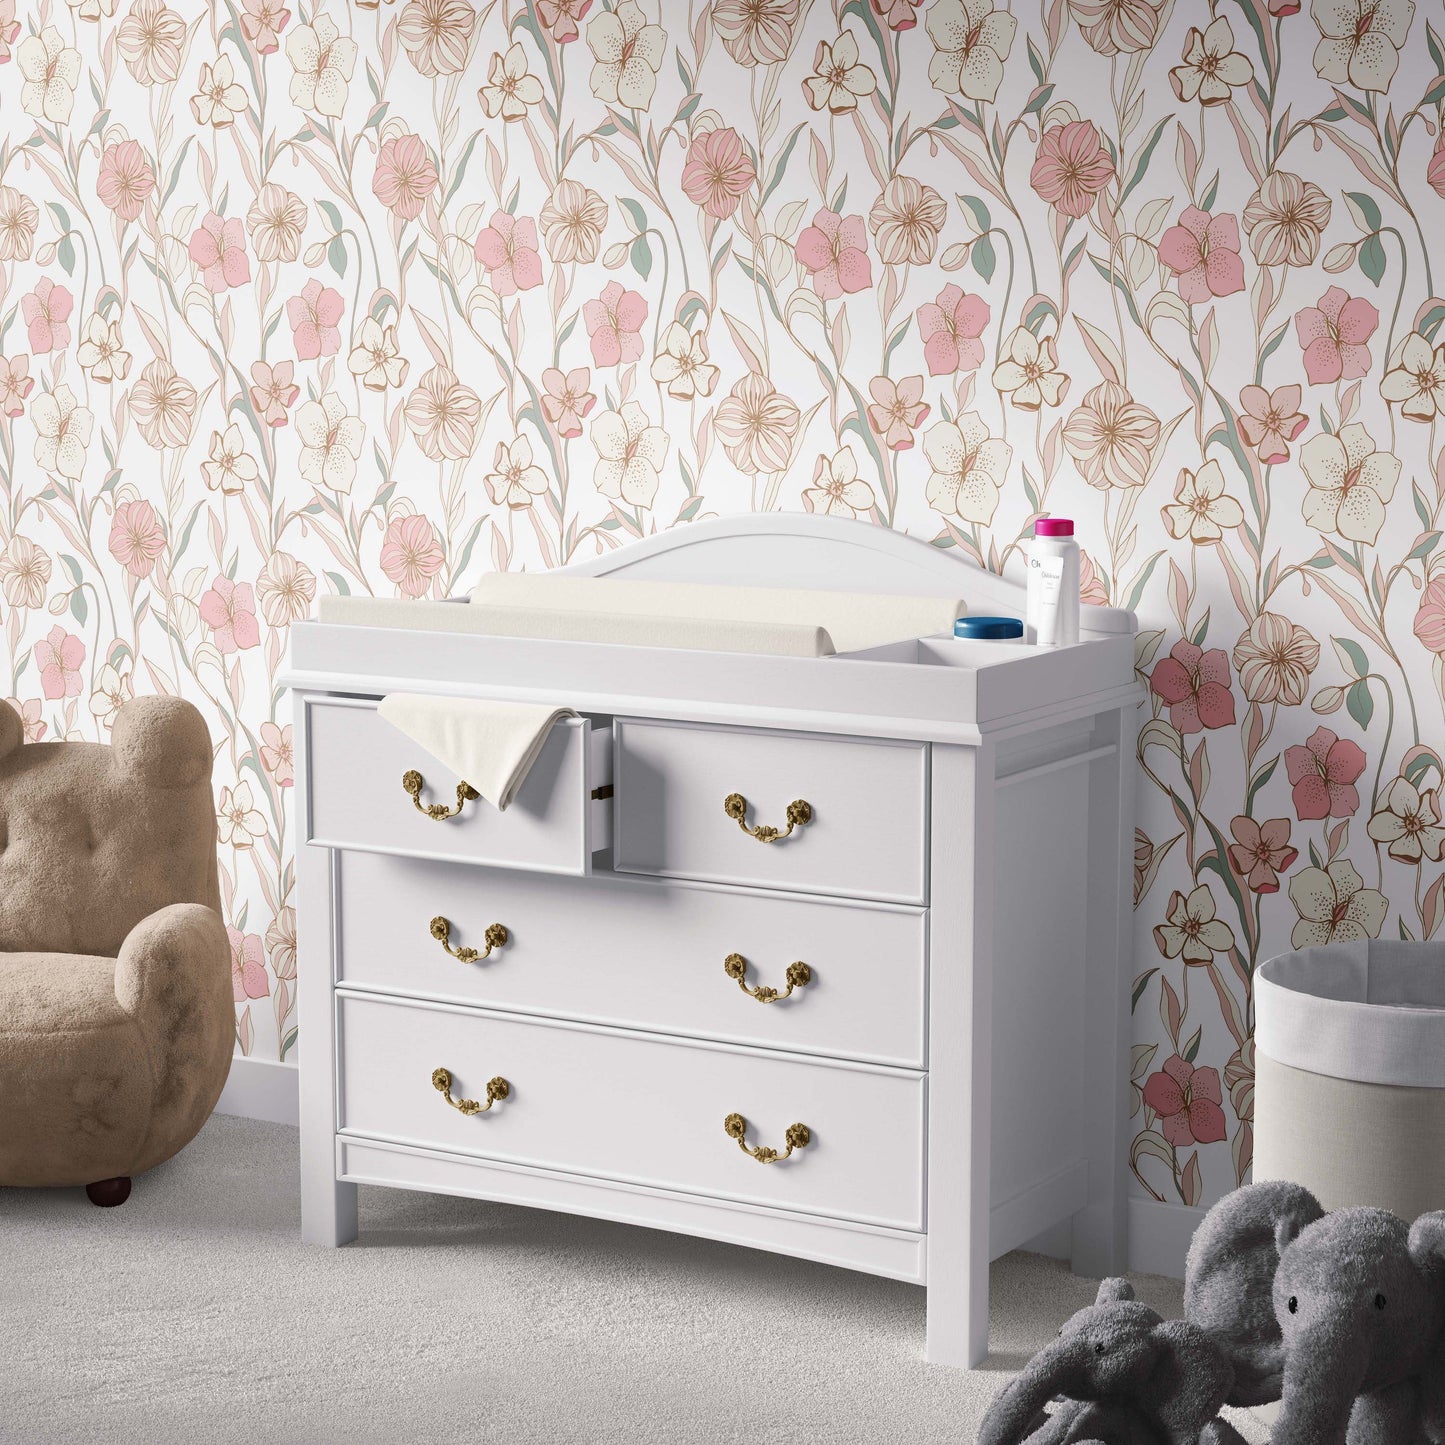 Flower Chateau | Clay Coated | Wallpaper